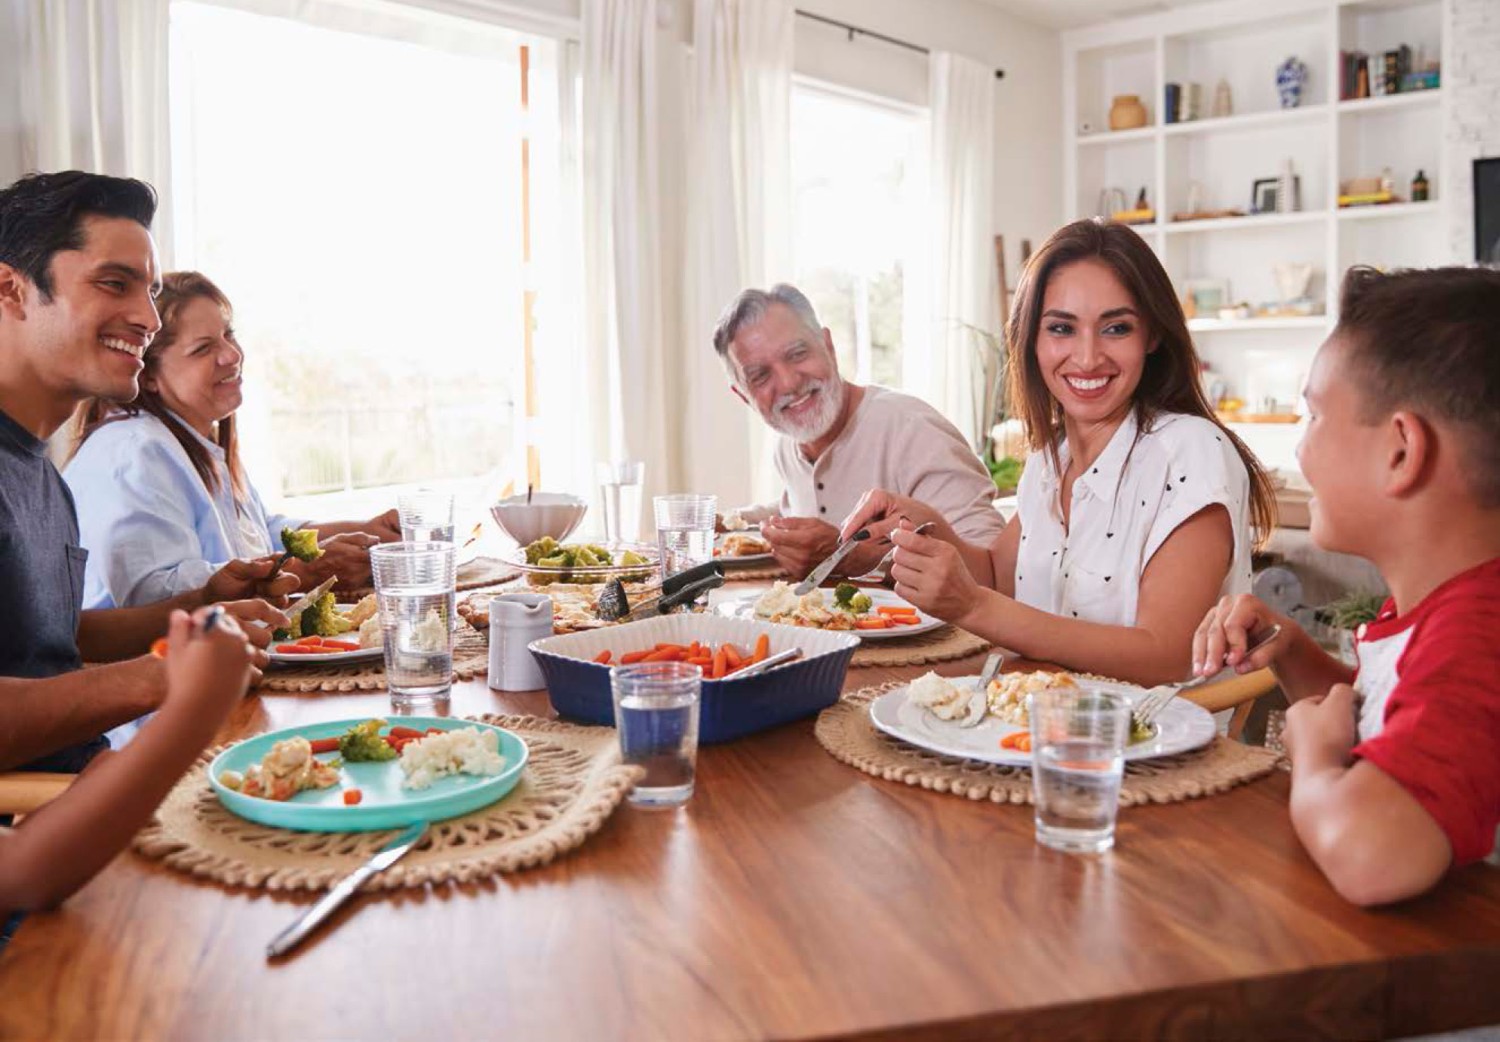 Your family could make a habit of reflecting together At the dinner table - photo 8